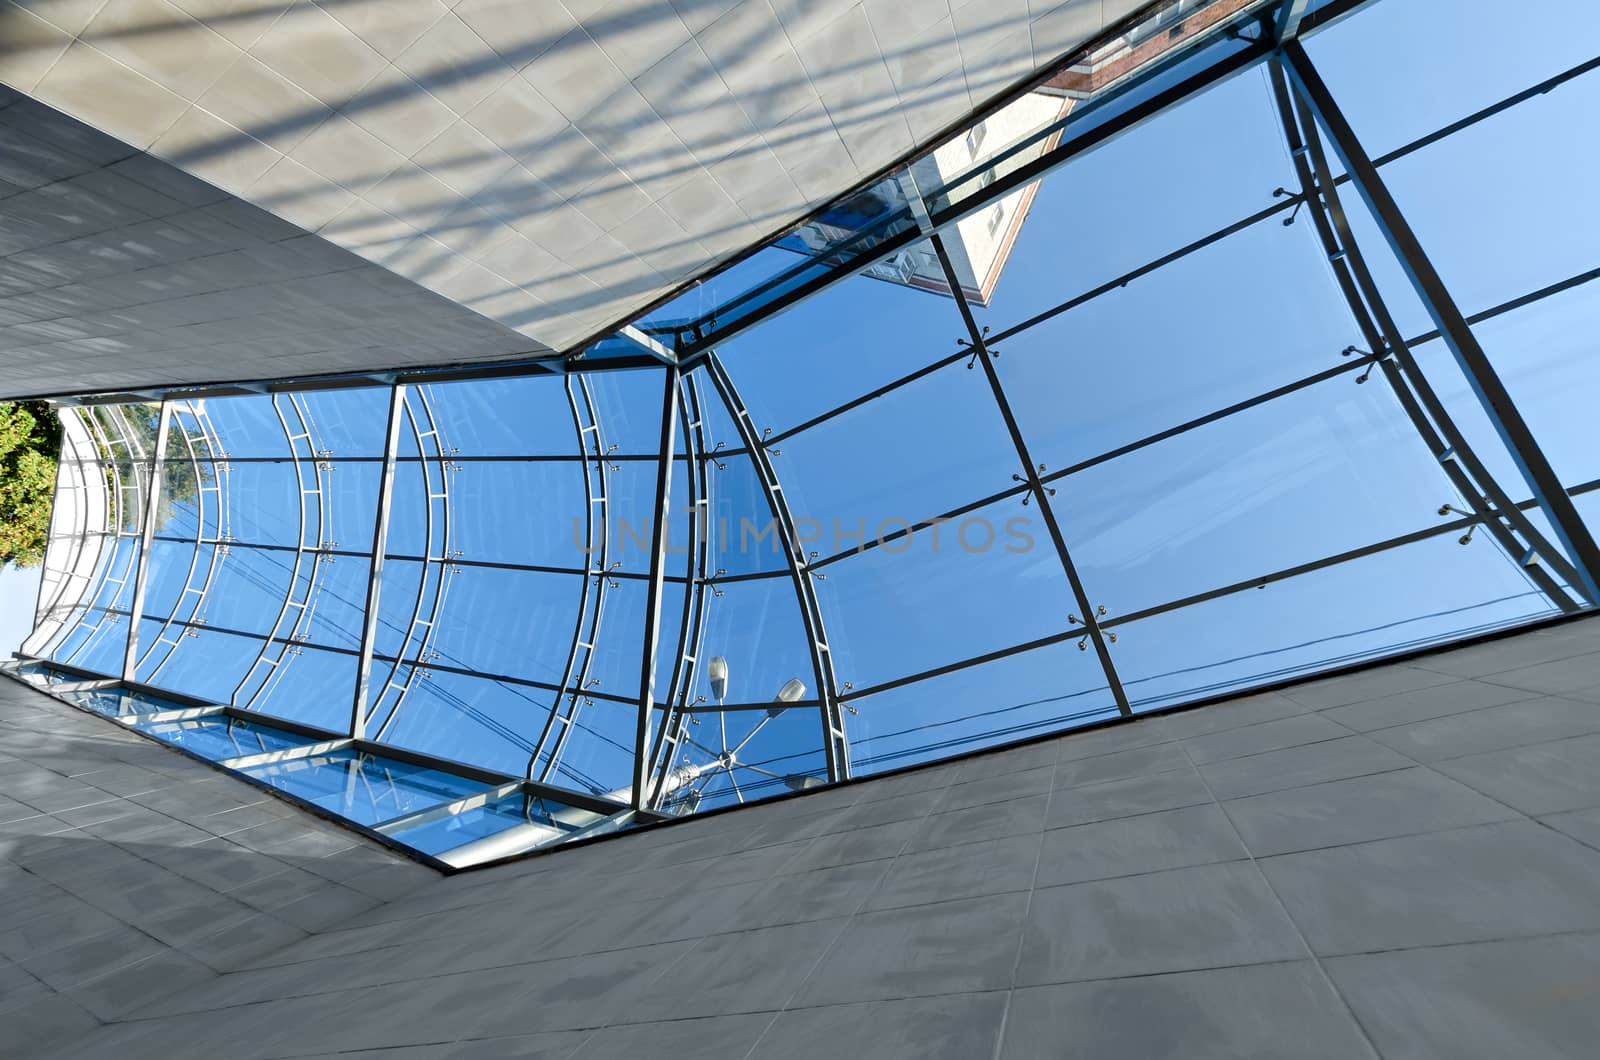 The glass roof at the crosswalk, reflection and blue sky